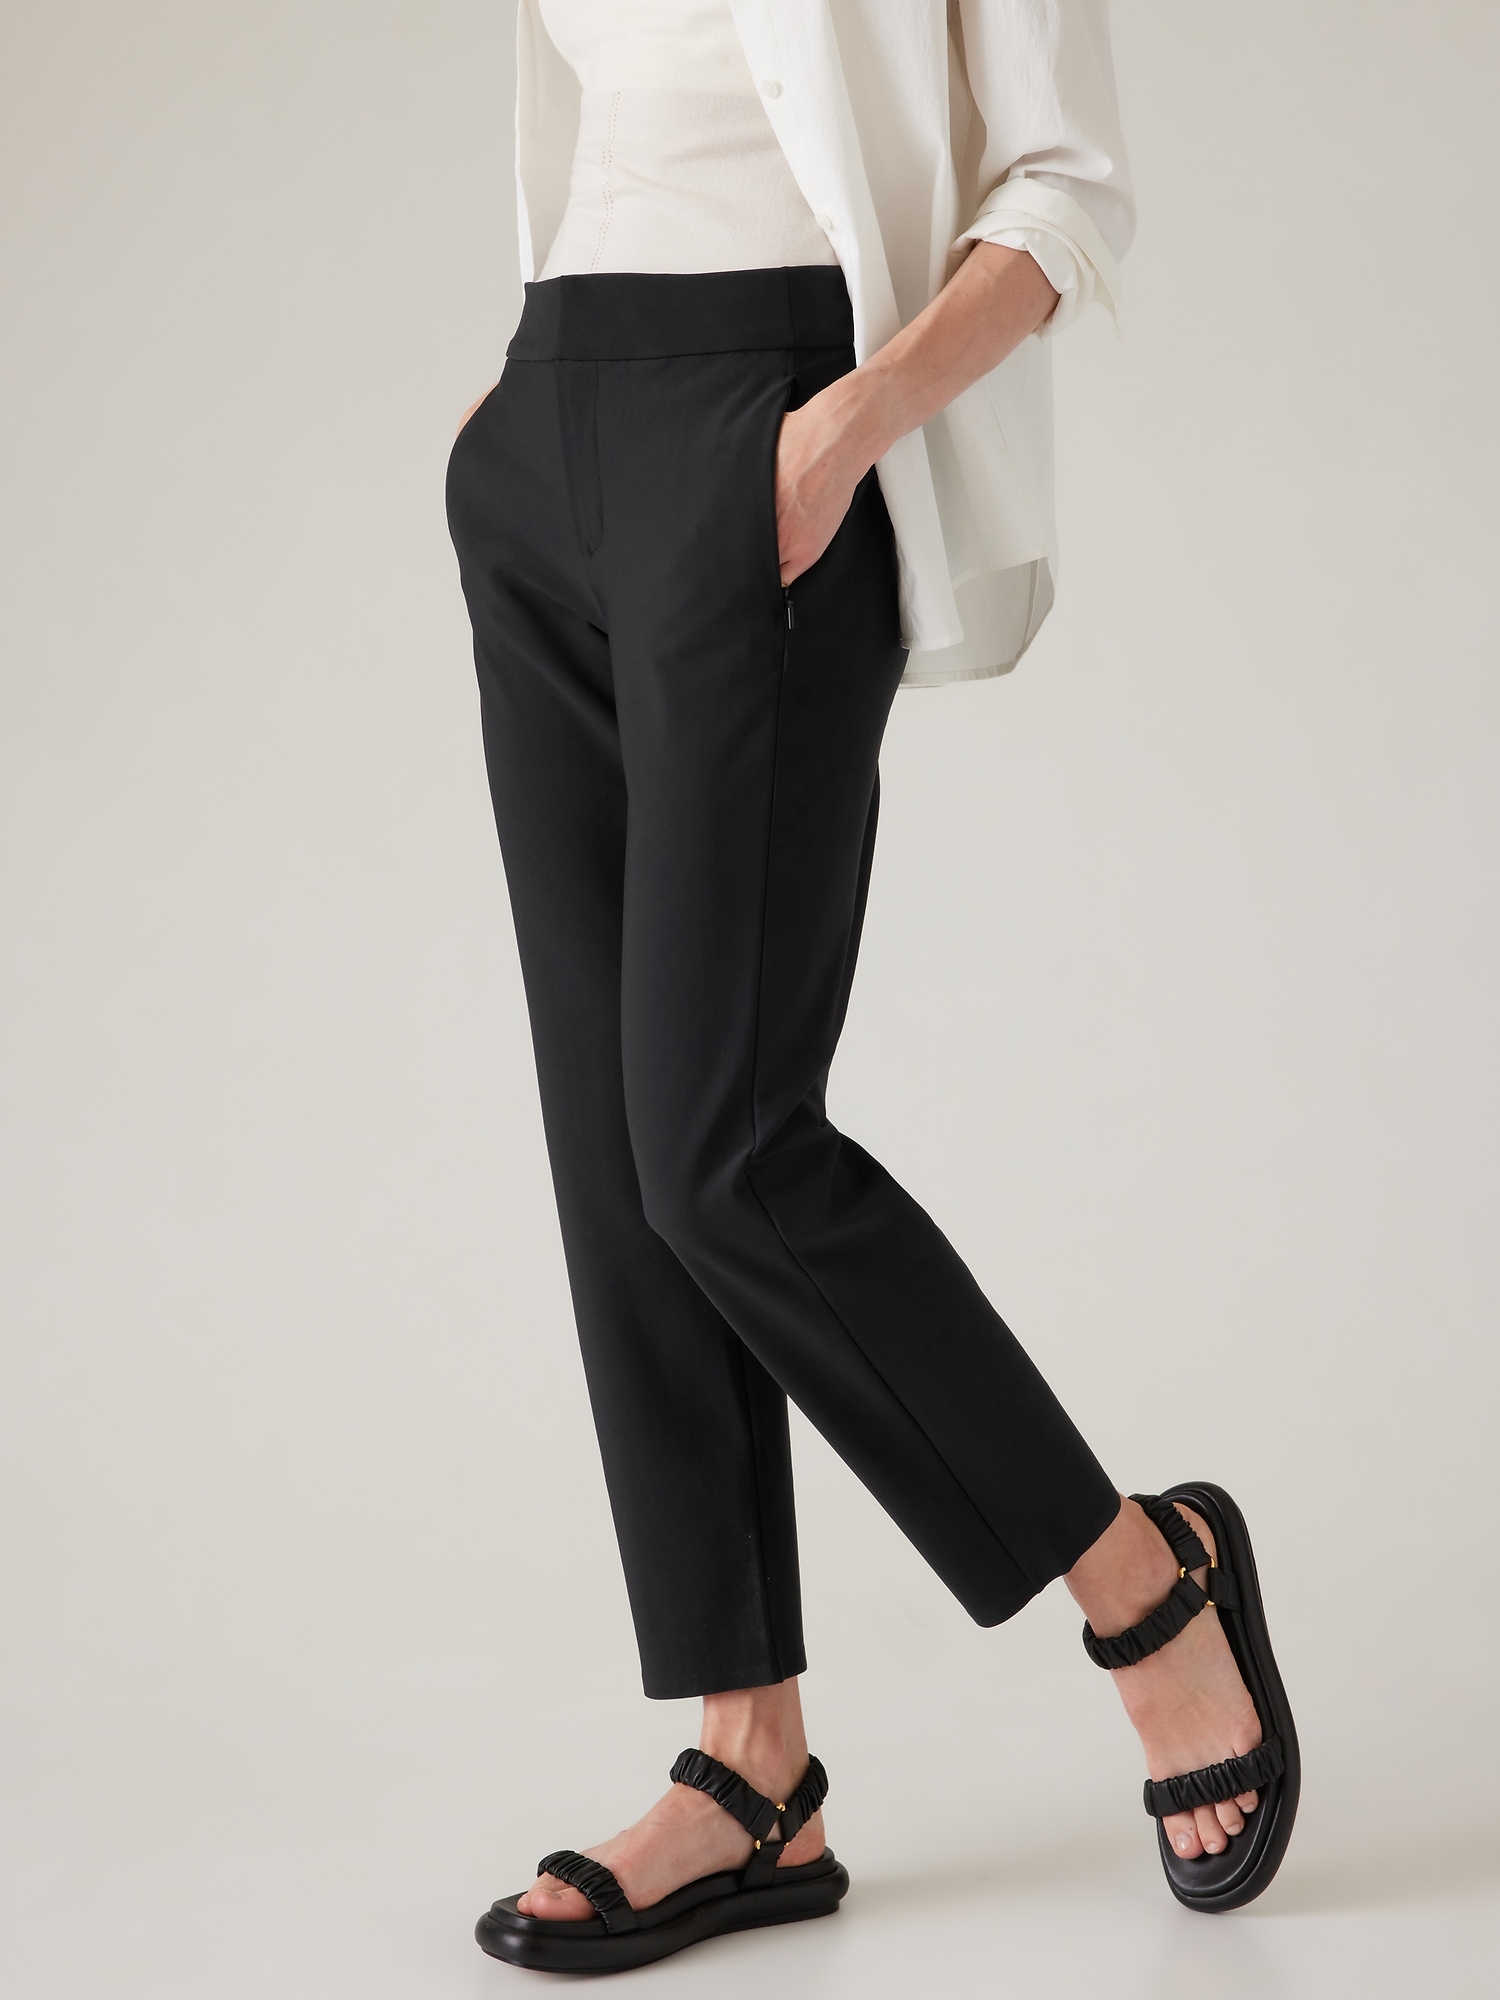 The Trouser Fit Guide | Trousers for Women | Hobbs London | Hobbs |